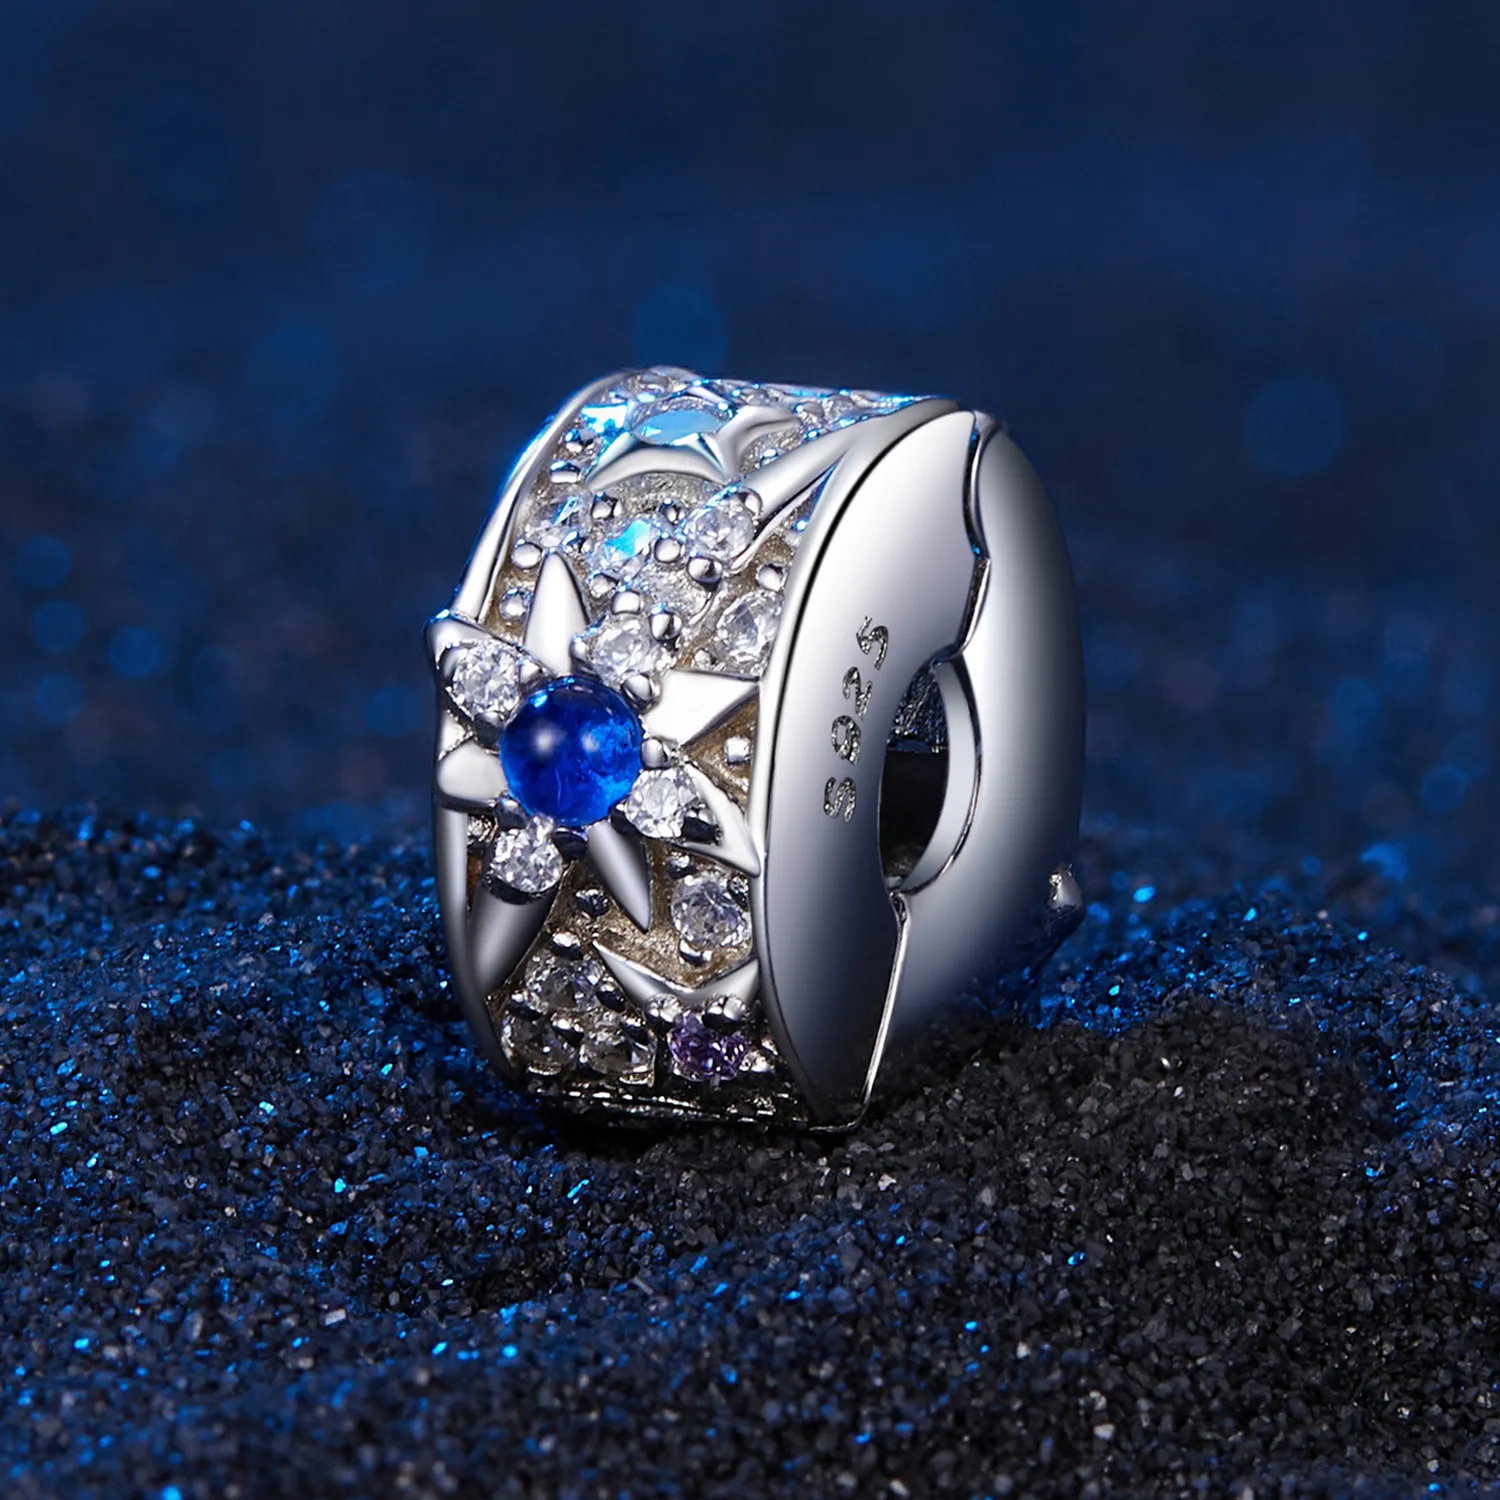 Pandora Style Starry Day and Night Clip - SCC2555